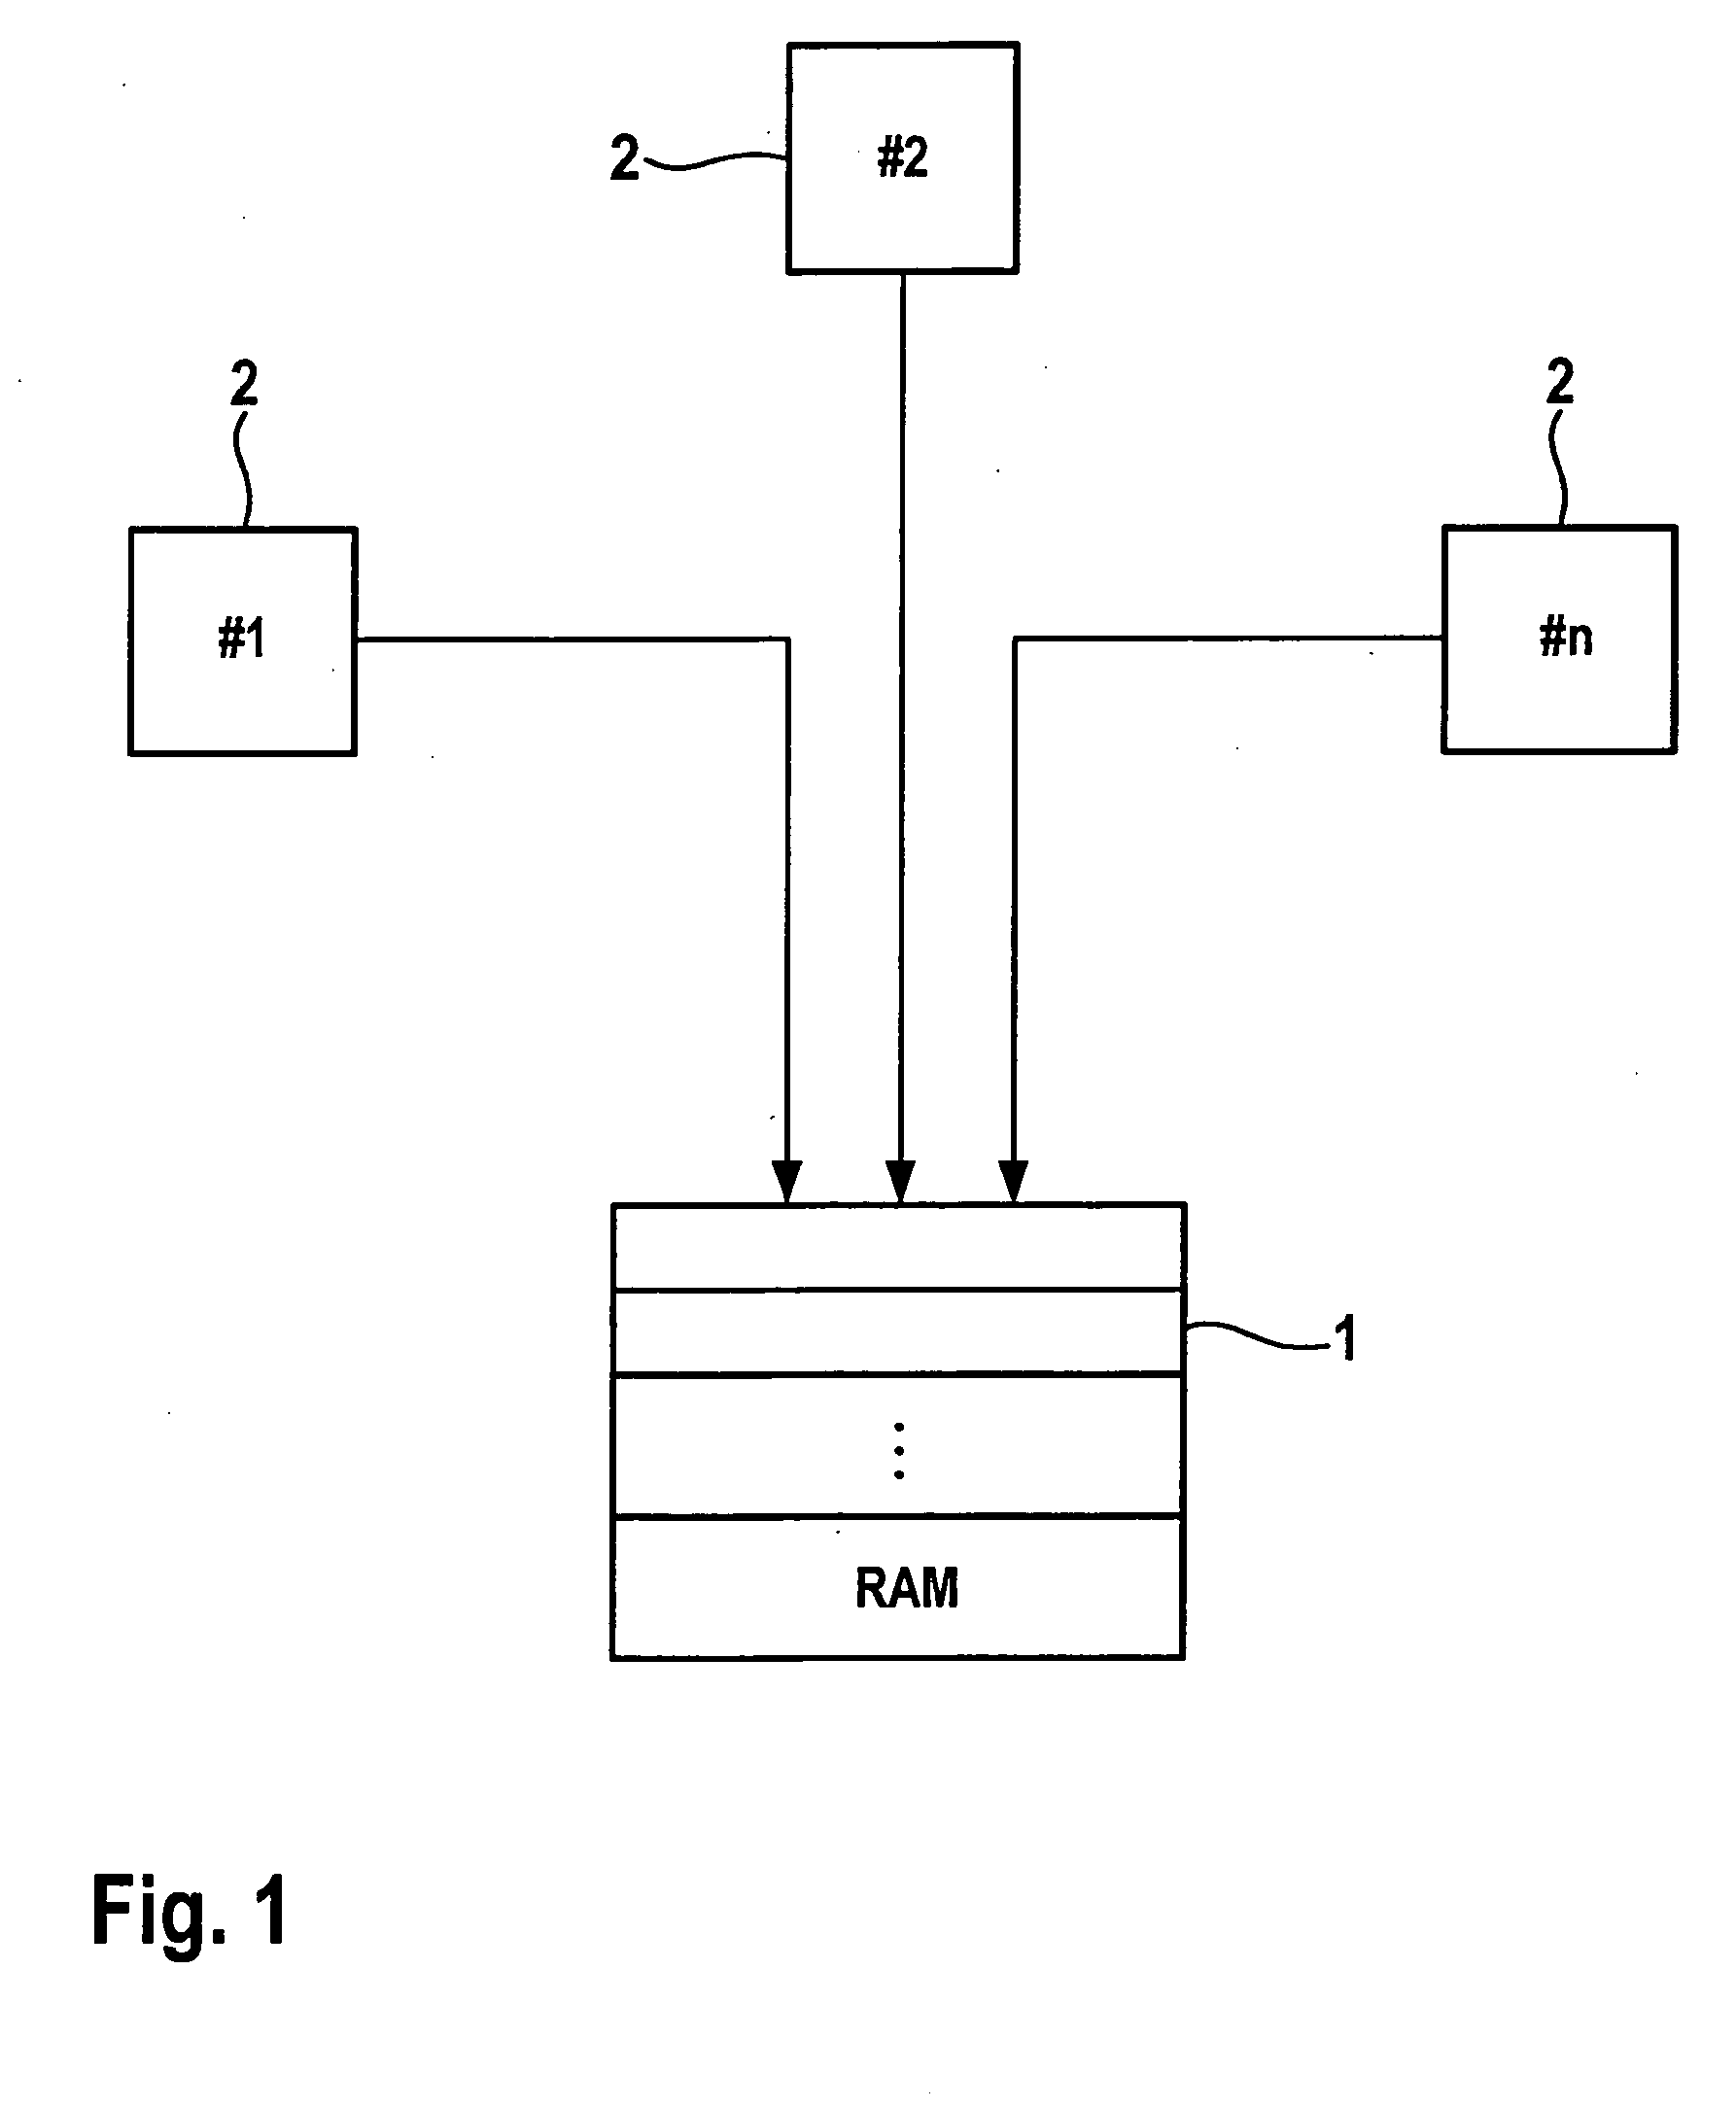 Method for controlling access to regions of a memory from a plurality of processes and a communication module having a message memory for implementing the method